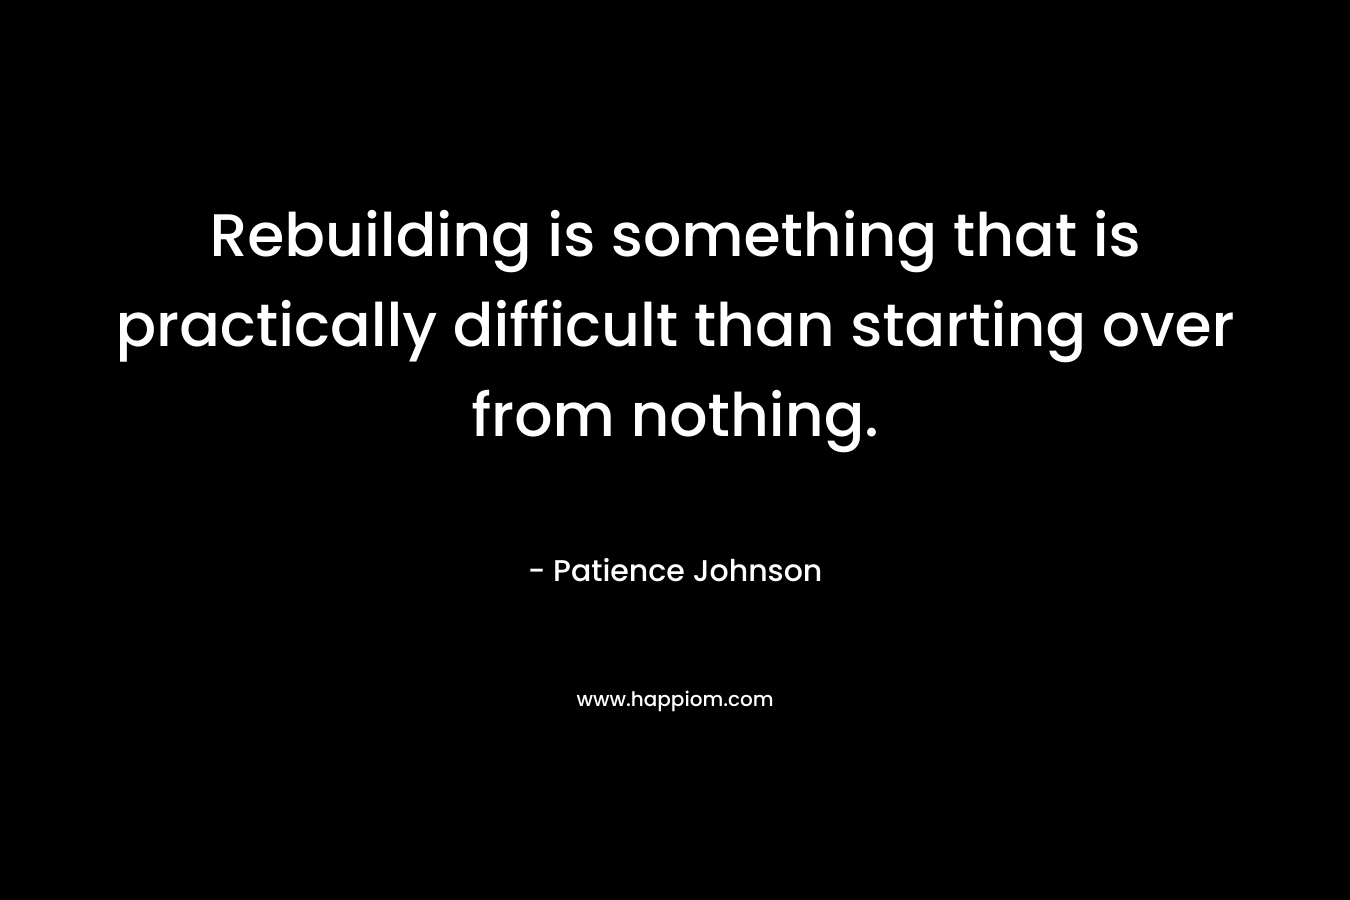 Rebuilding is something that is practically difficult than starting over from nothing. – Patience Johnson